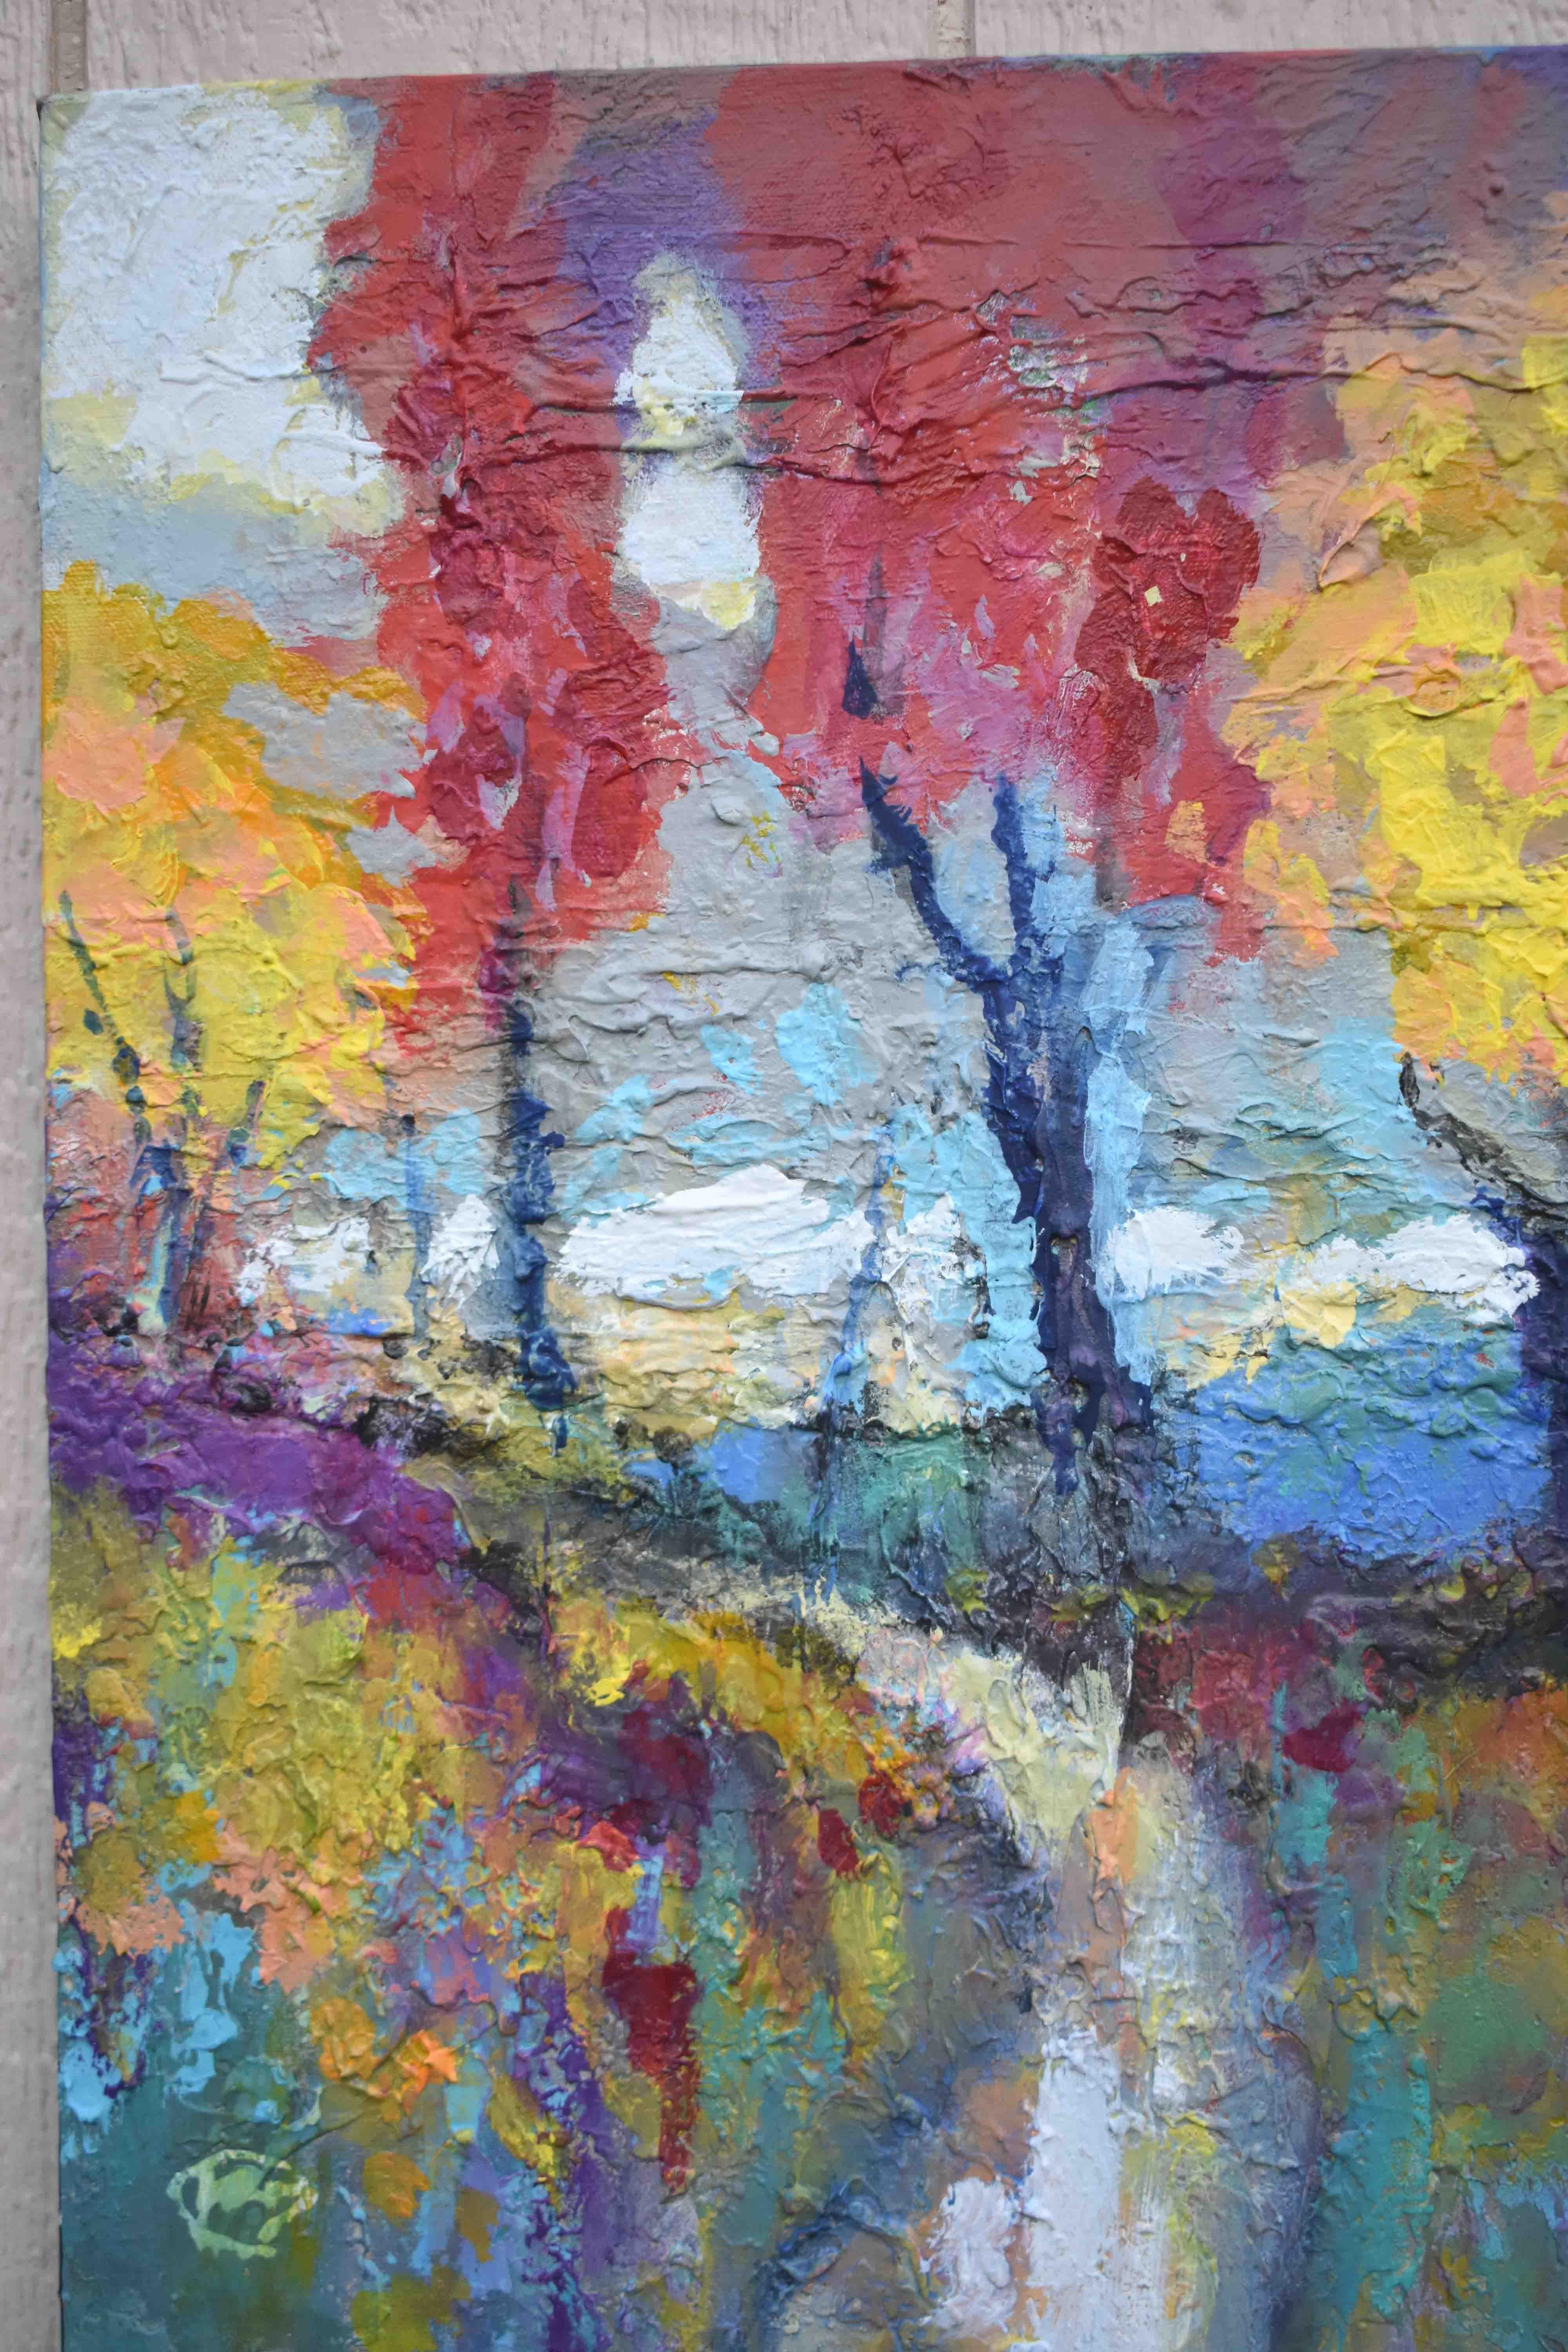 <p>Artist Comments<br>Artist Kip Decker paints a winding trail that leads to an open pasture beyond. A field of multicolored wildflowers lines the well-trodden path on both sides. At the top of the hill, a stand of colorful trees greet the welcome